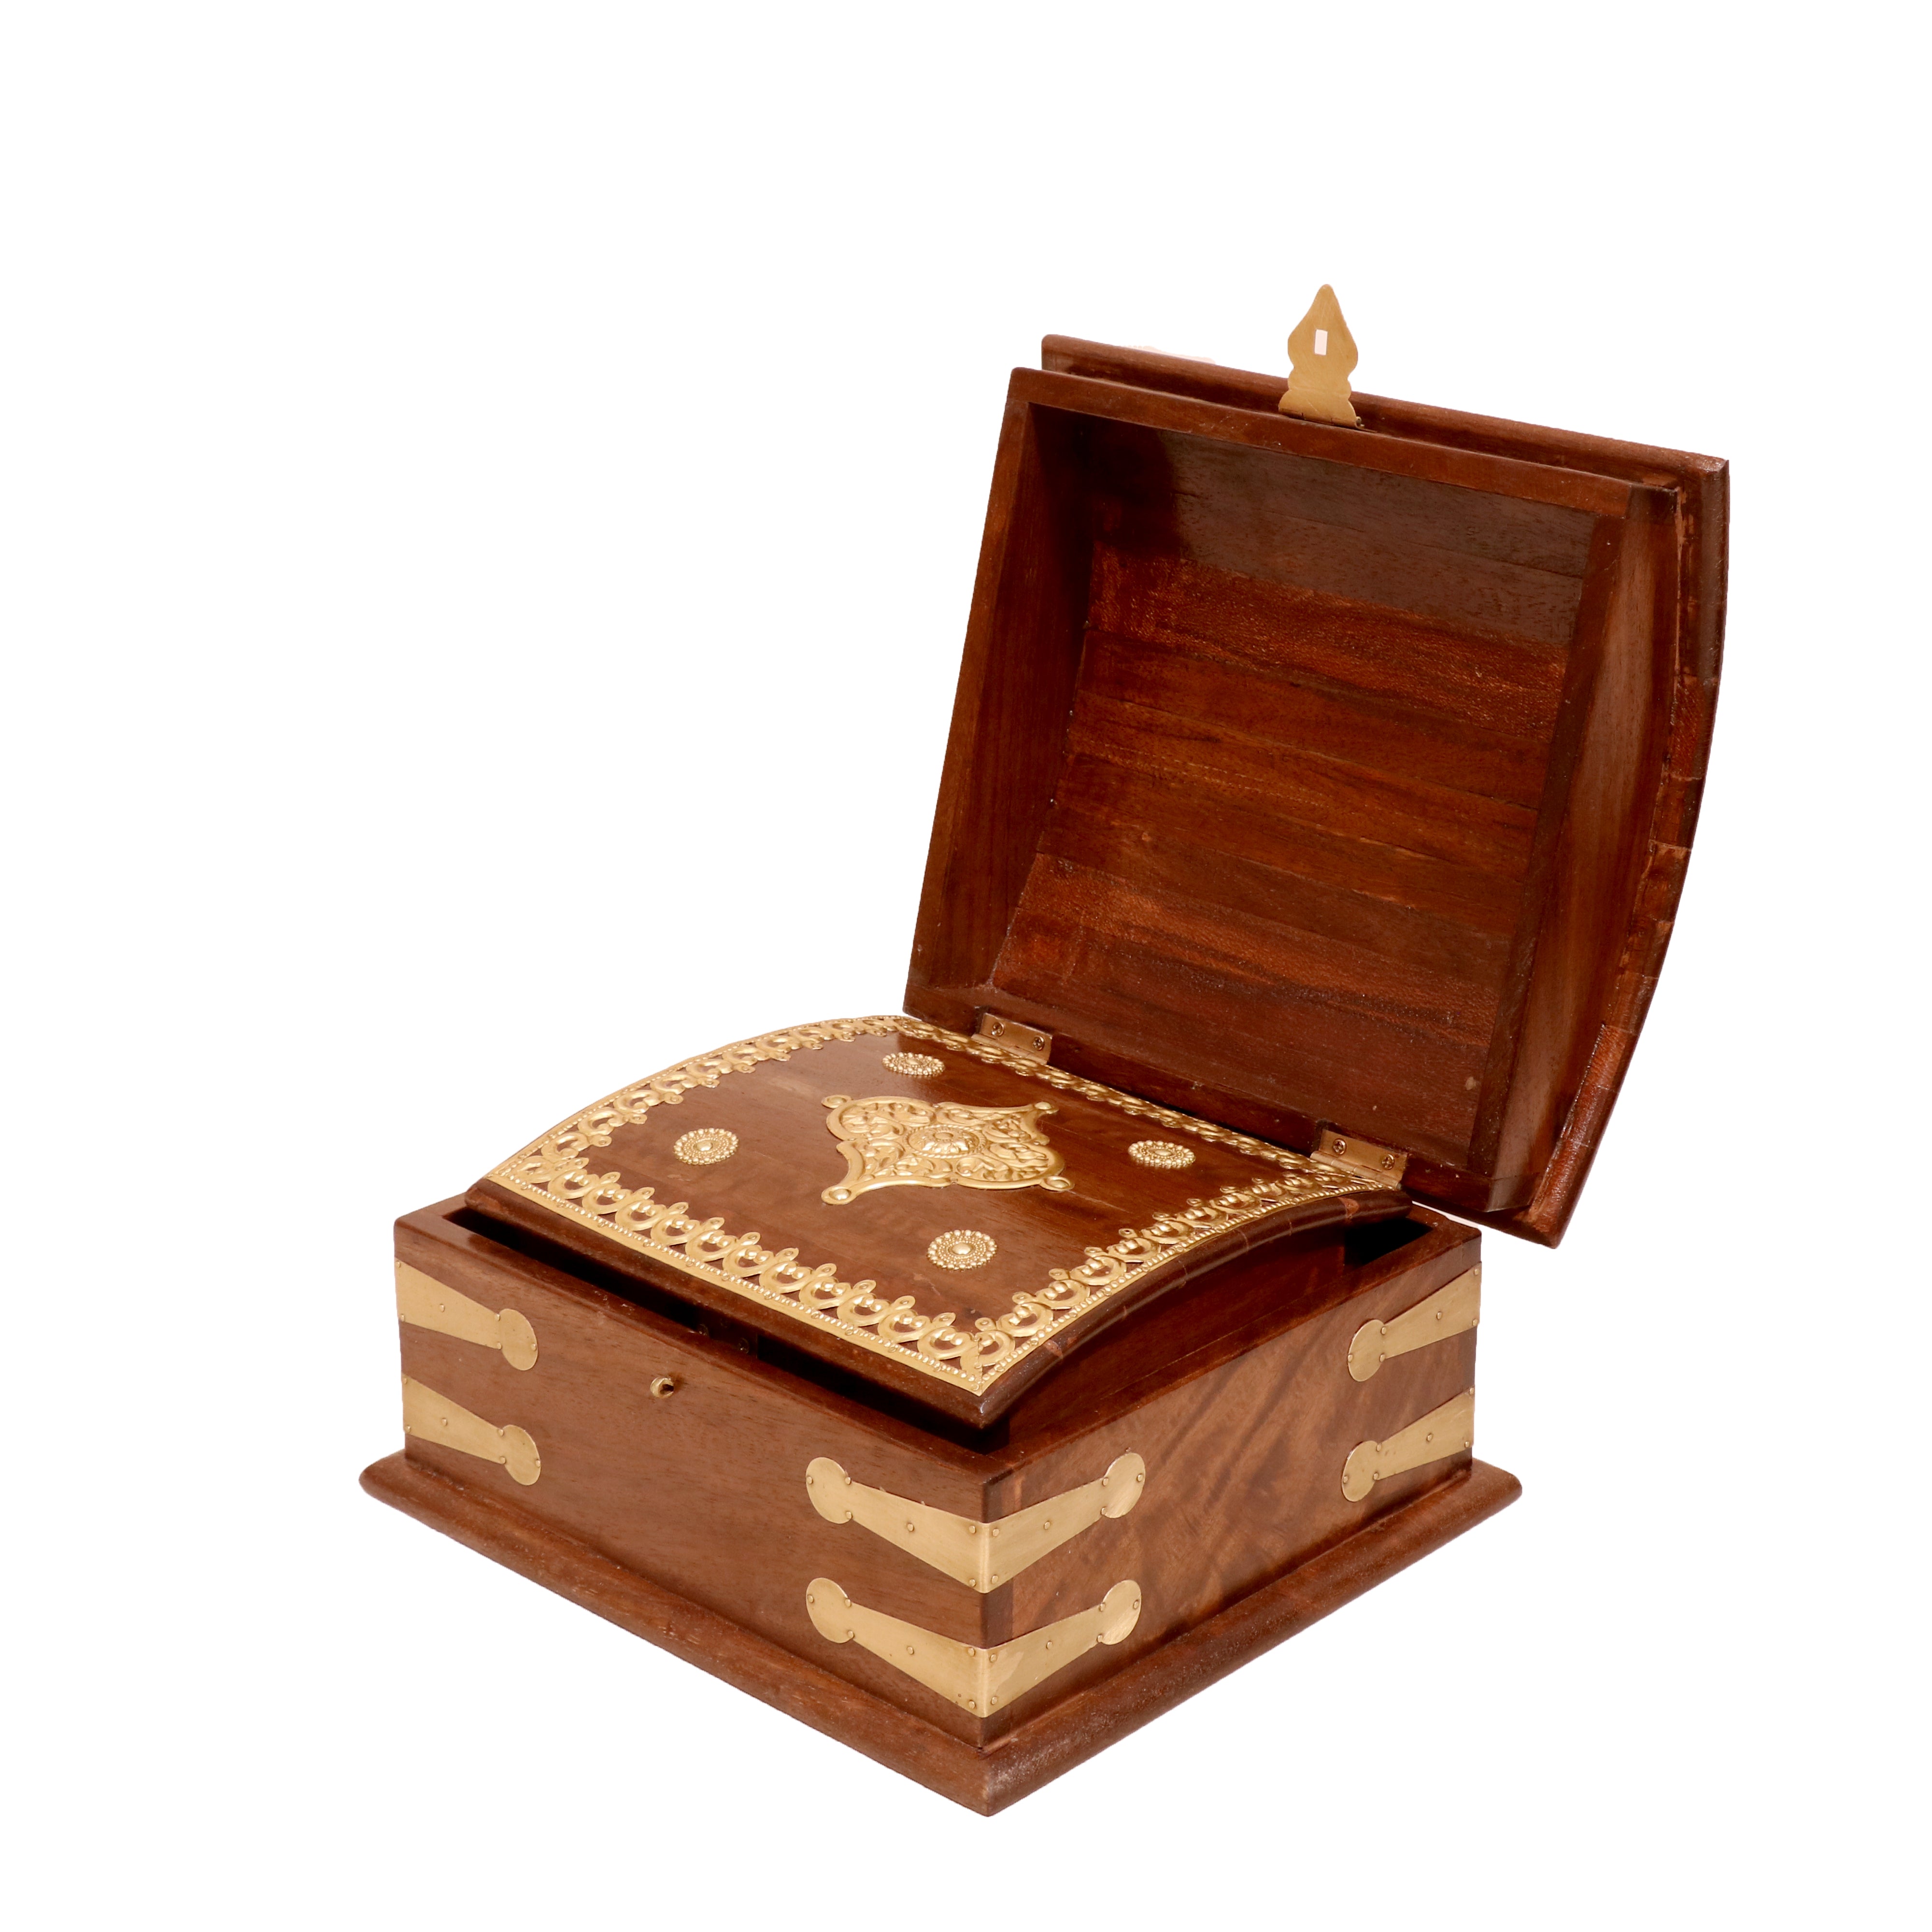 Wooden Curved Boxes Wooden Box